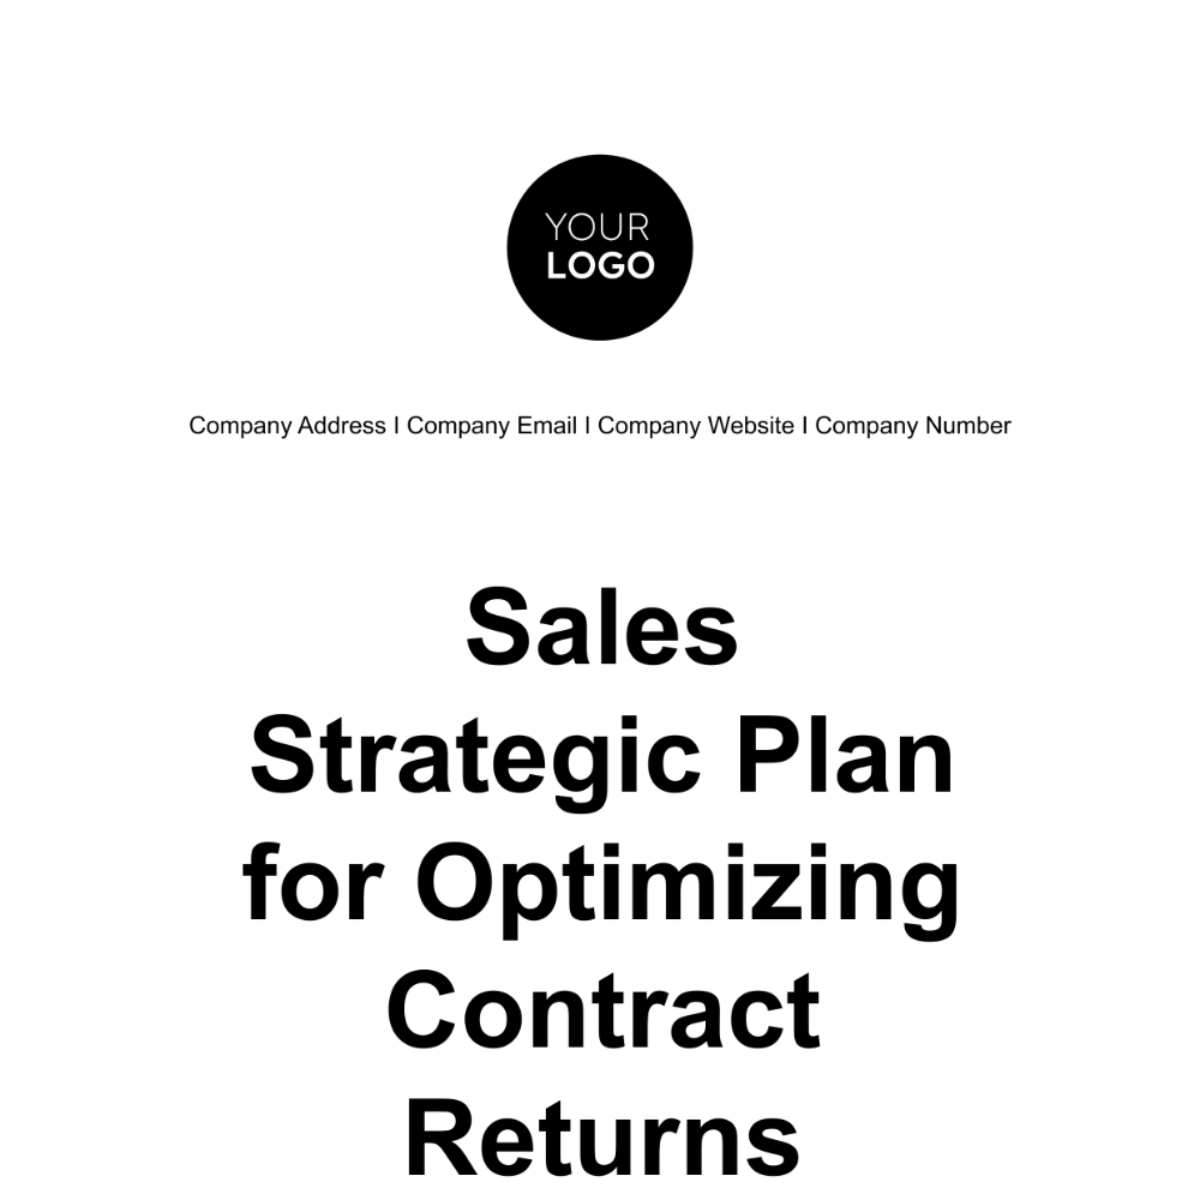 Free Sales Strategic Plan for Optimizing Contract Returns Template